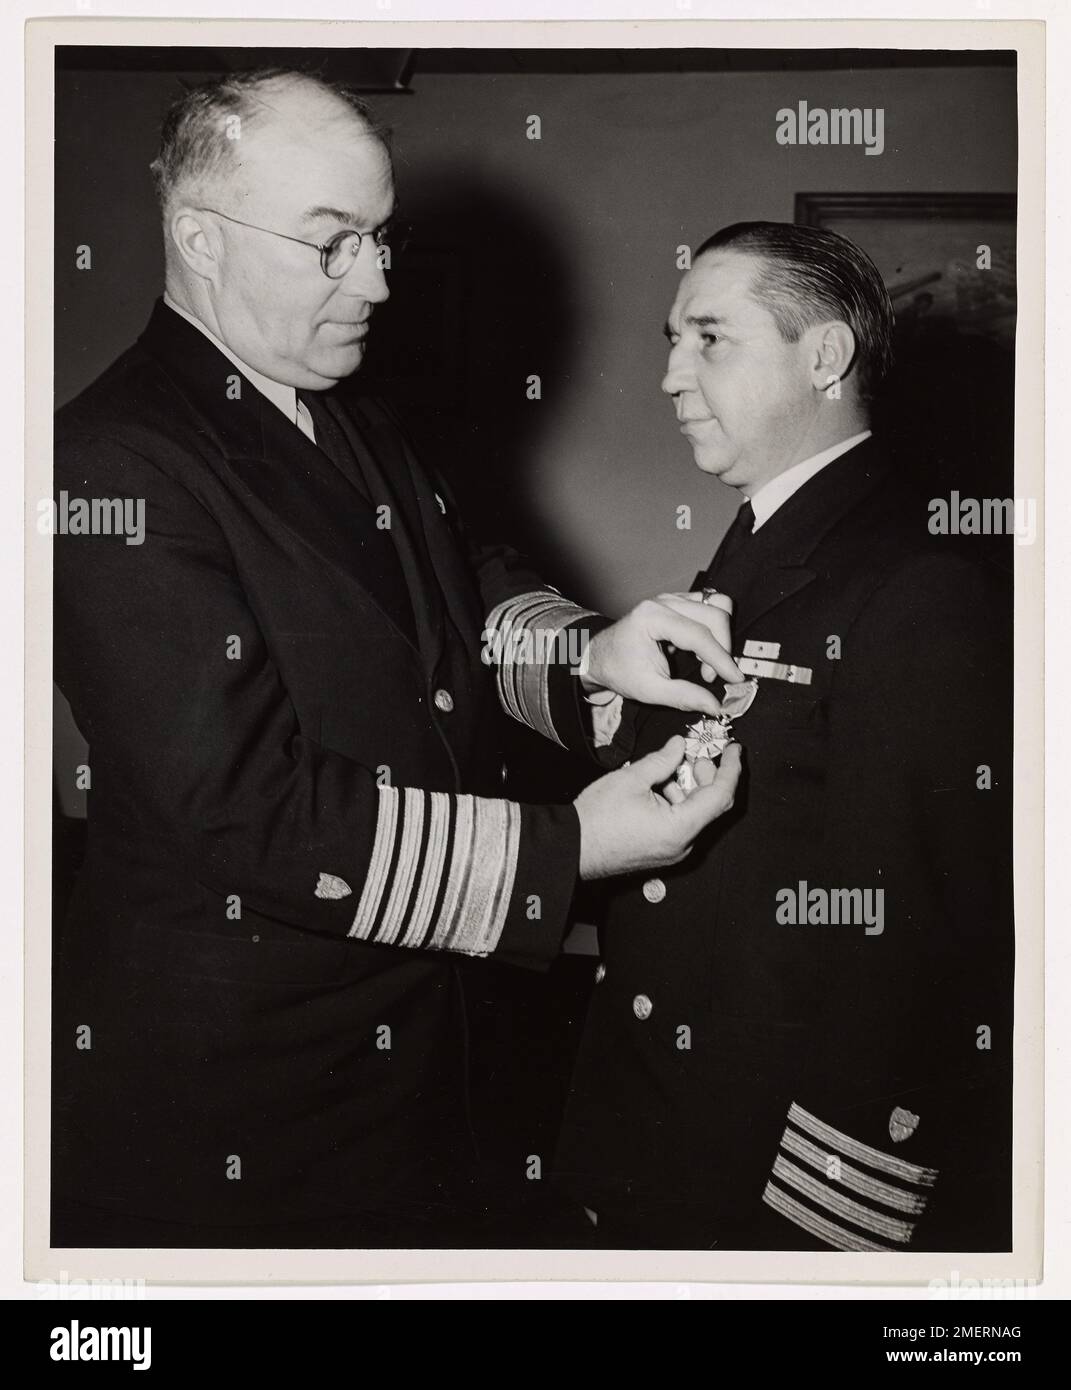 Coast Guard Captain of Washington, DC, Awarded Legion of Merit. Admiral Joseph F. Farley, USCG, Commandant of the Coast Guard, presents the Legion of Merit to Captain Frank T. Kenner, USCG, of Washington, D.C., Chief of the Program Planning Division at Coast Guard Headquarters. The medal was awarded to Captain Kenner by General Headquarters of the U.S. Army Forces in the Pacific, for his exceptionally meritorious services in New Guinea and the Philippines as Commander of the Coast Guard Army Detachment there. In manning and operating more than two hundred Army vessels, repairing and maintainin Stock Photo